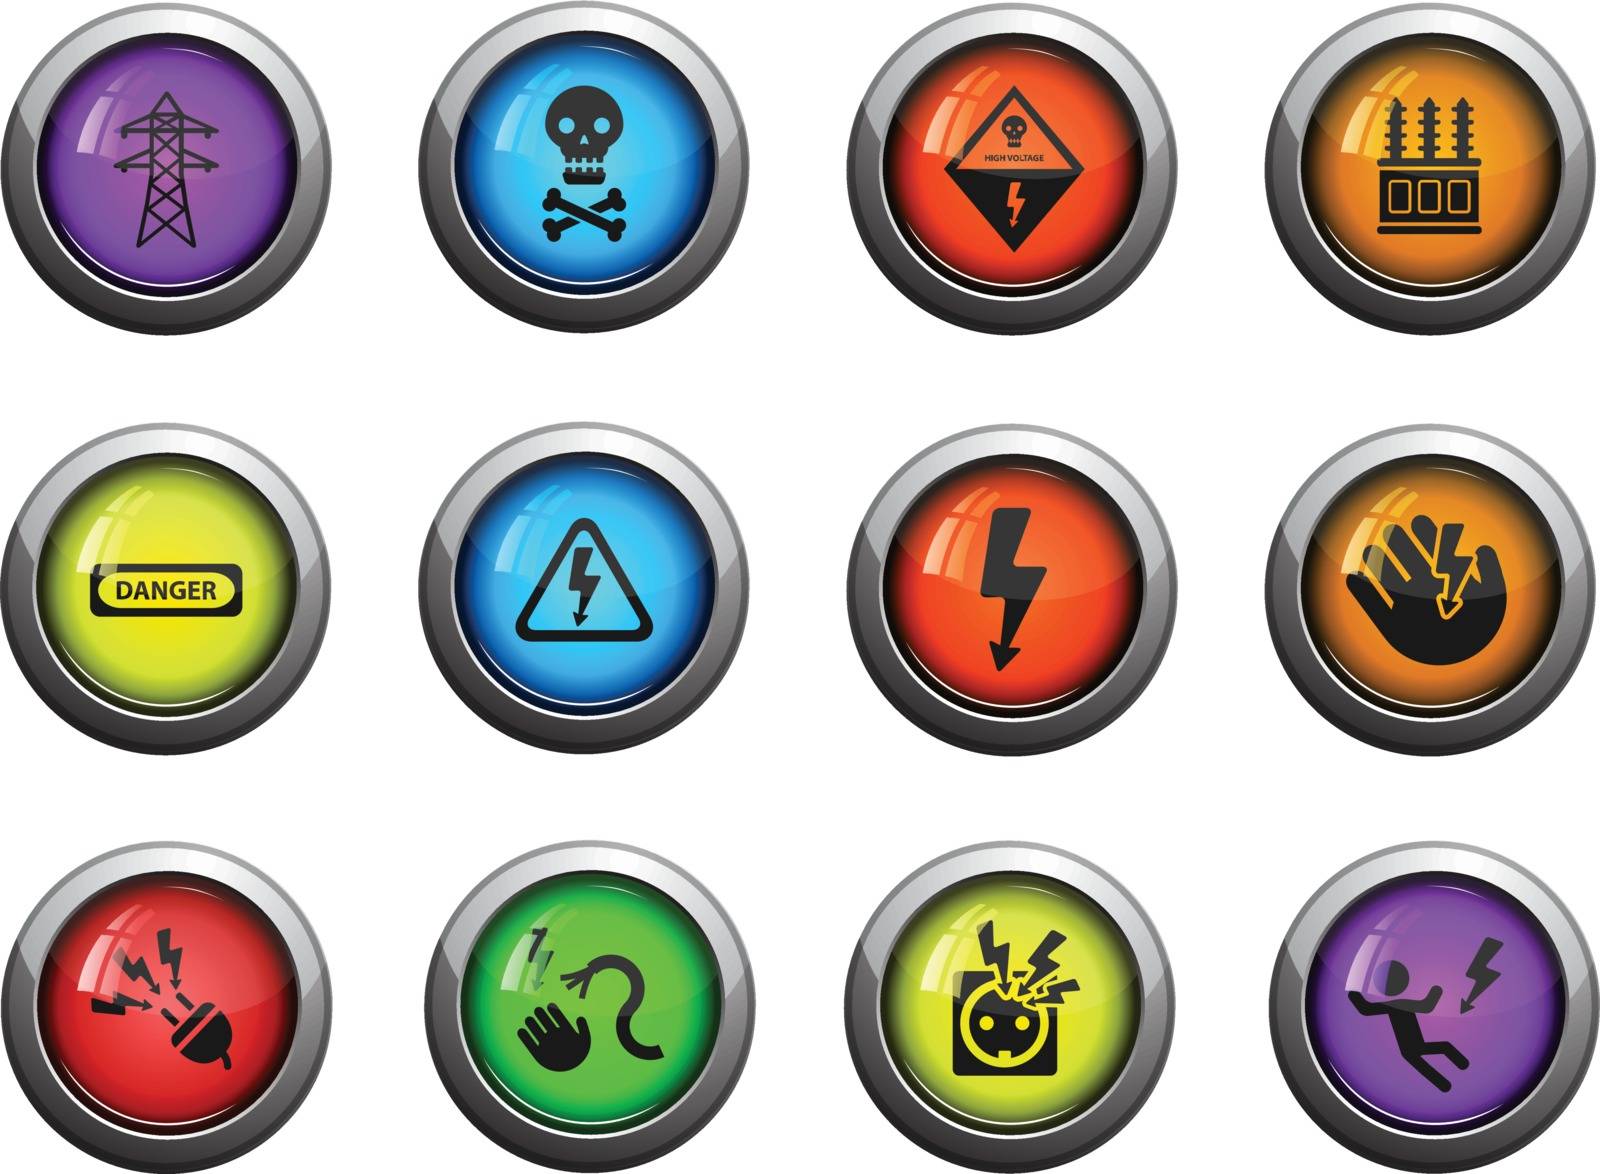 High voltage icons set for web sites and user interface